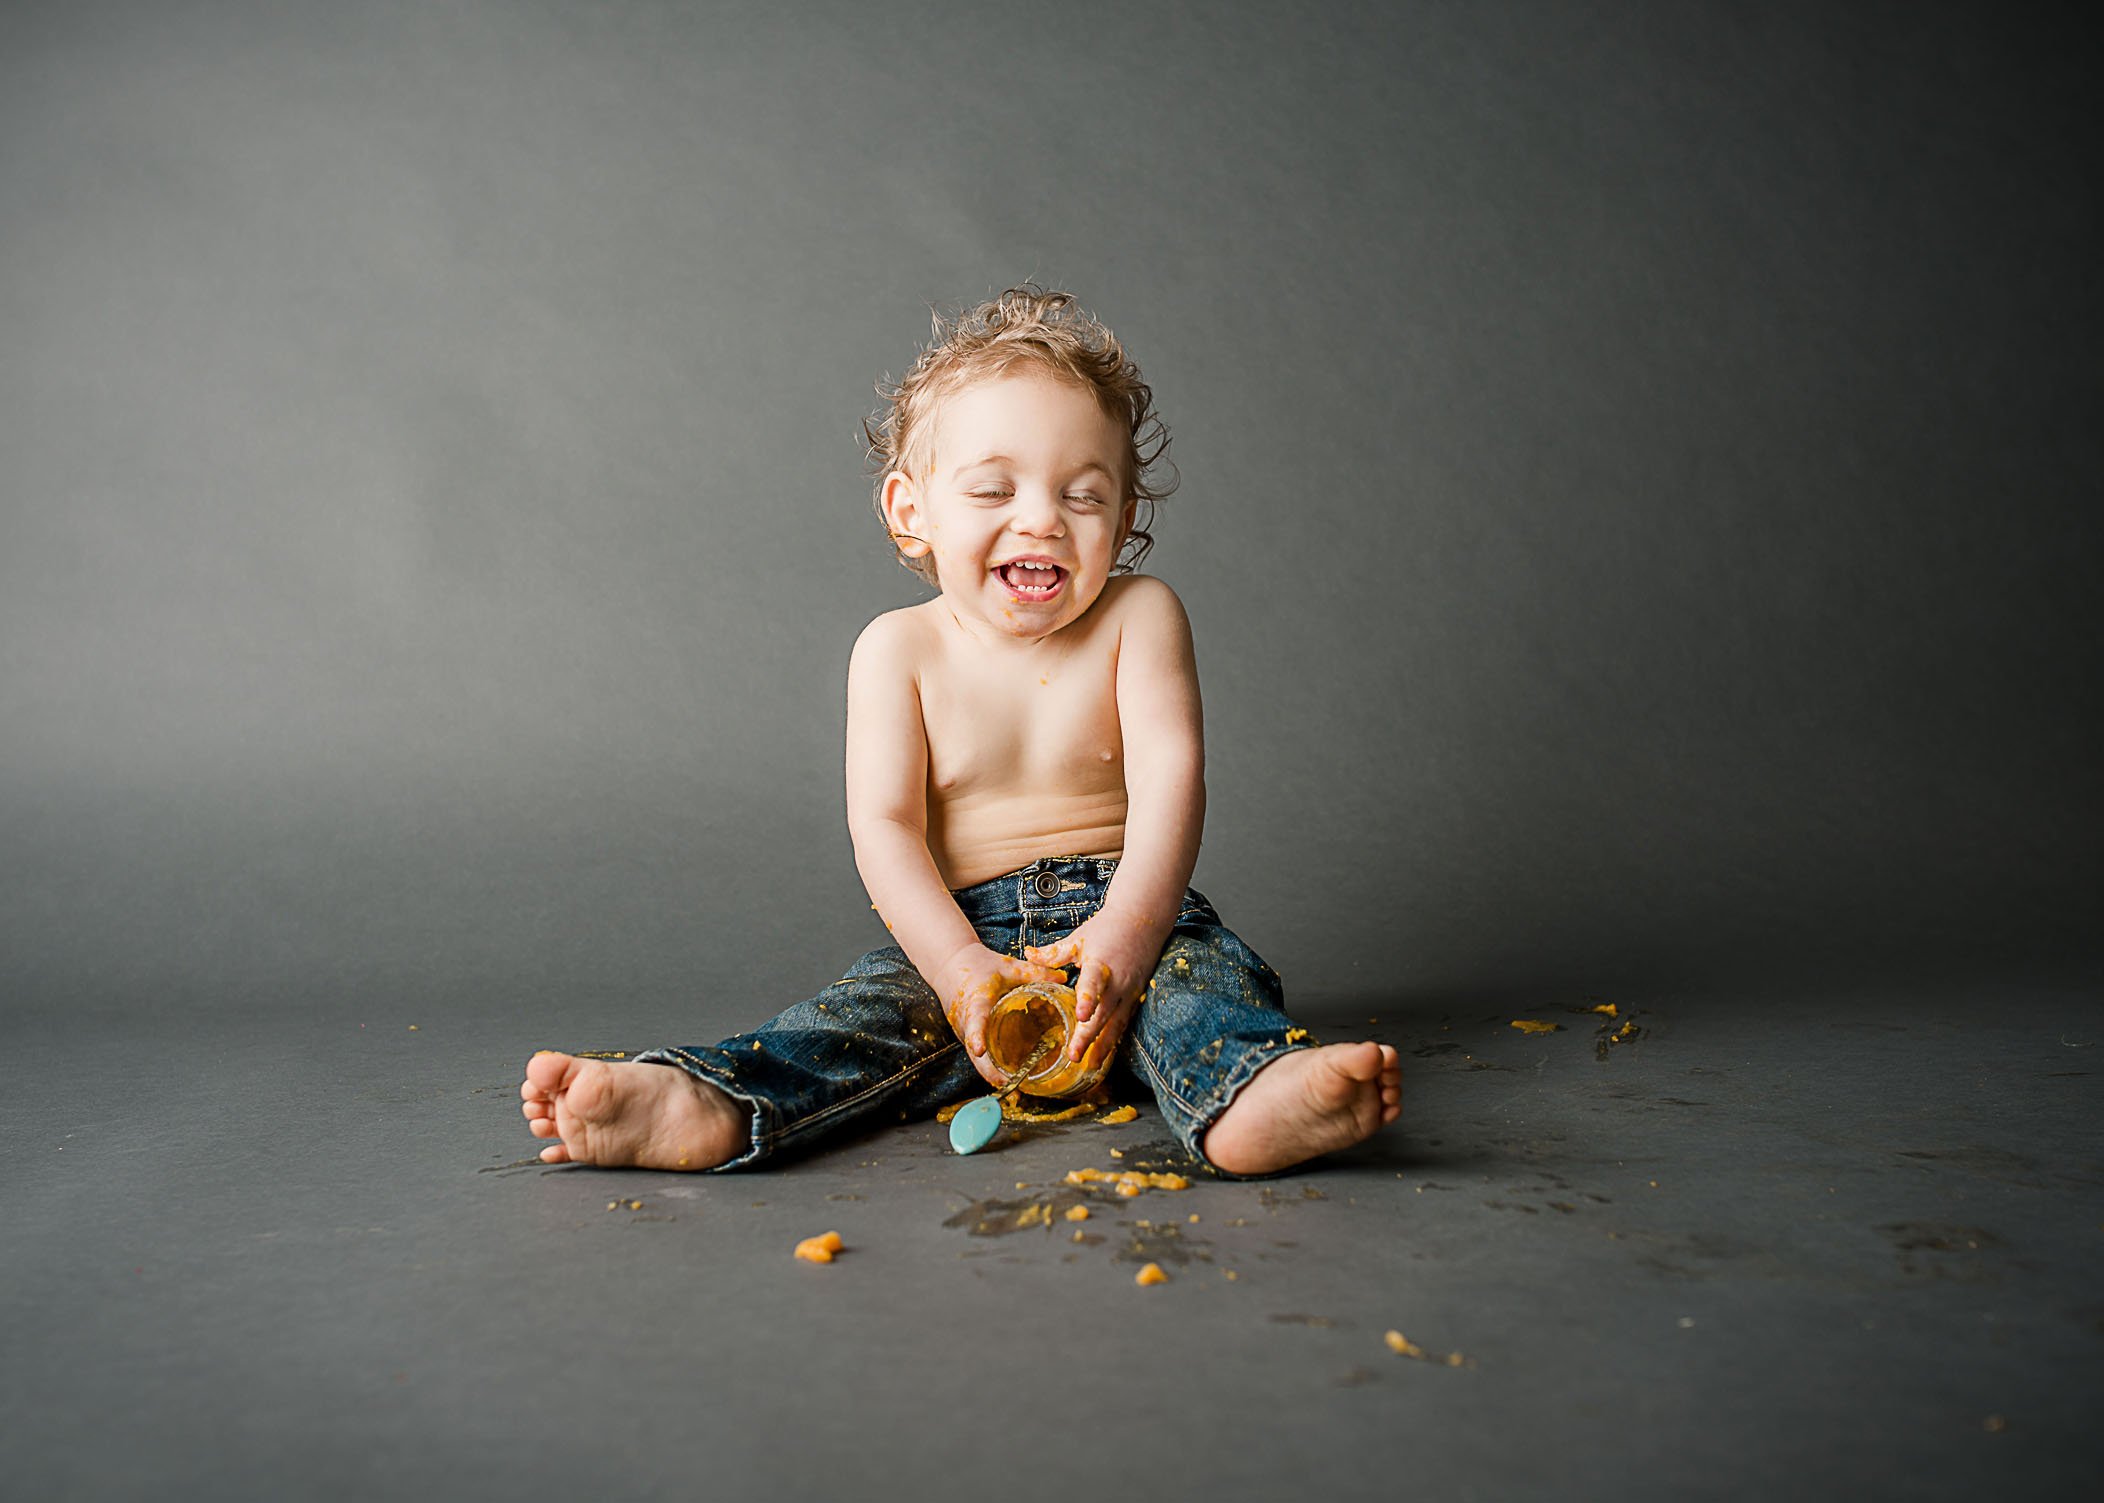 18 month old boy sitting on ground and messy from eating jar of food One Big Happy Photo